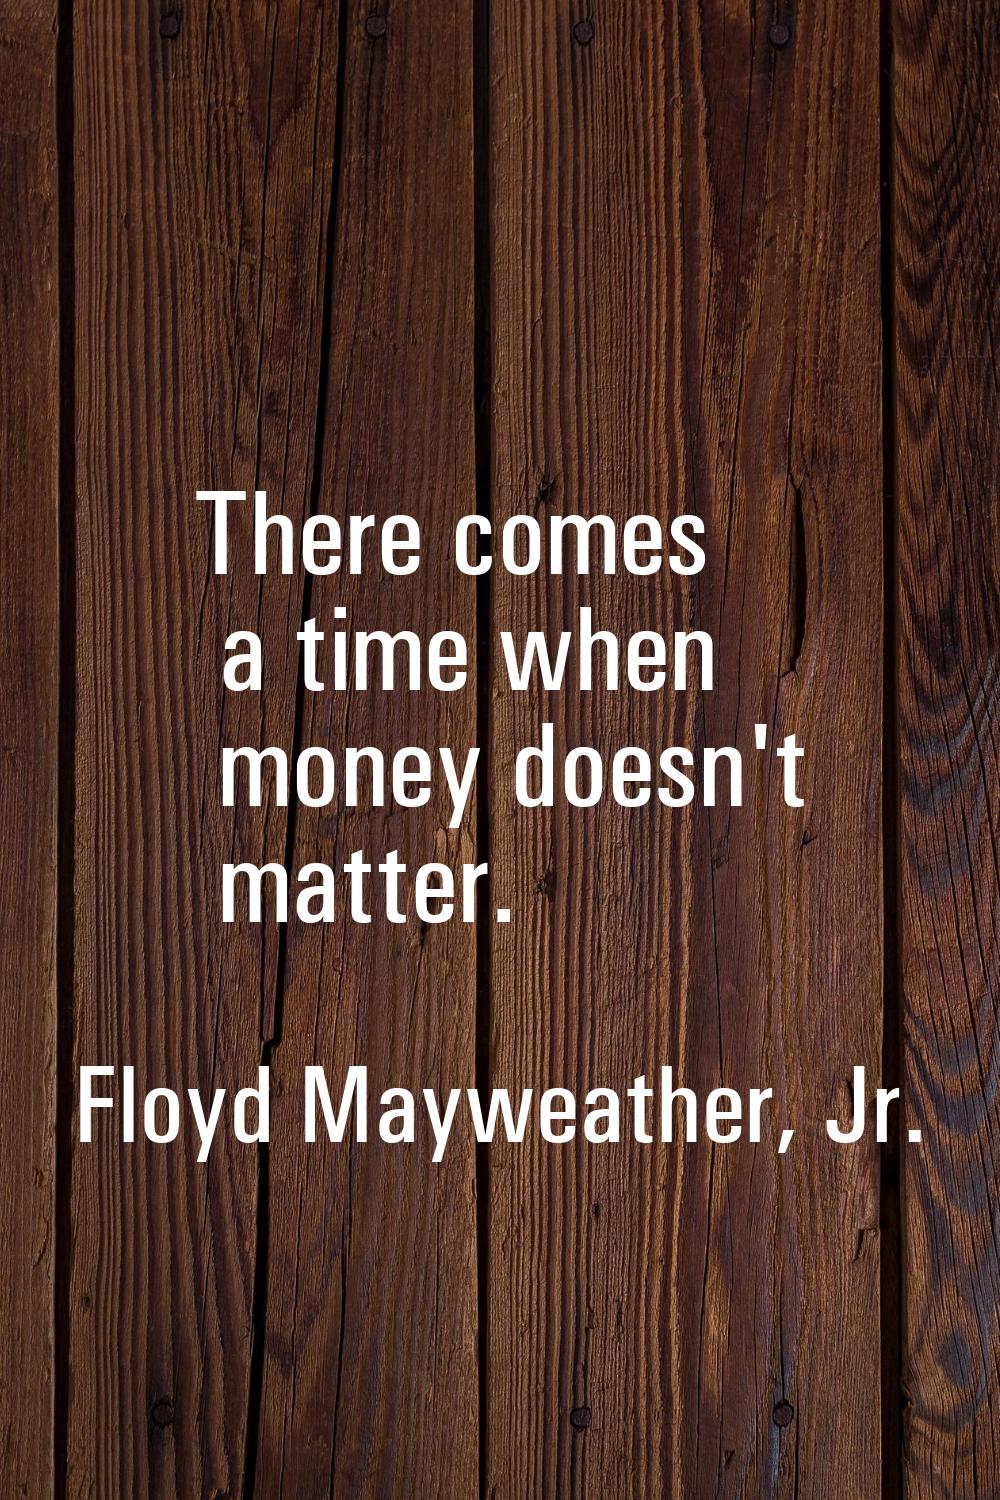 There comes a time when money doesn't matter.